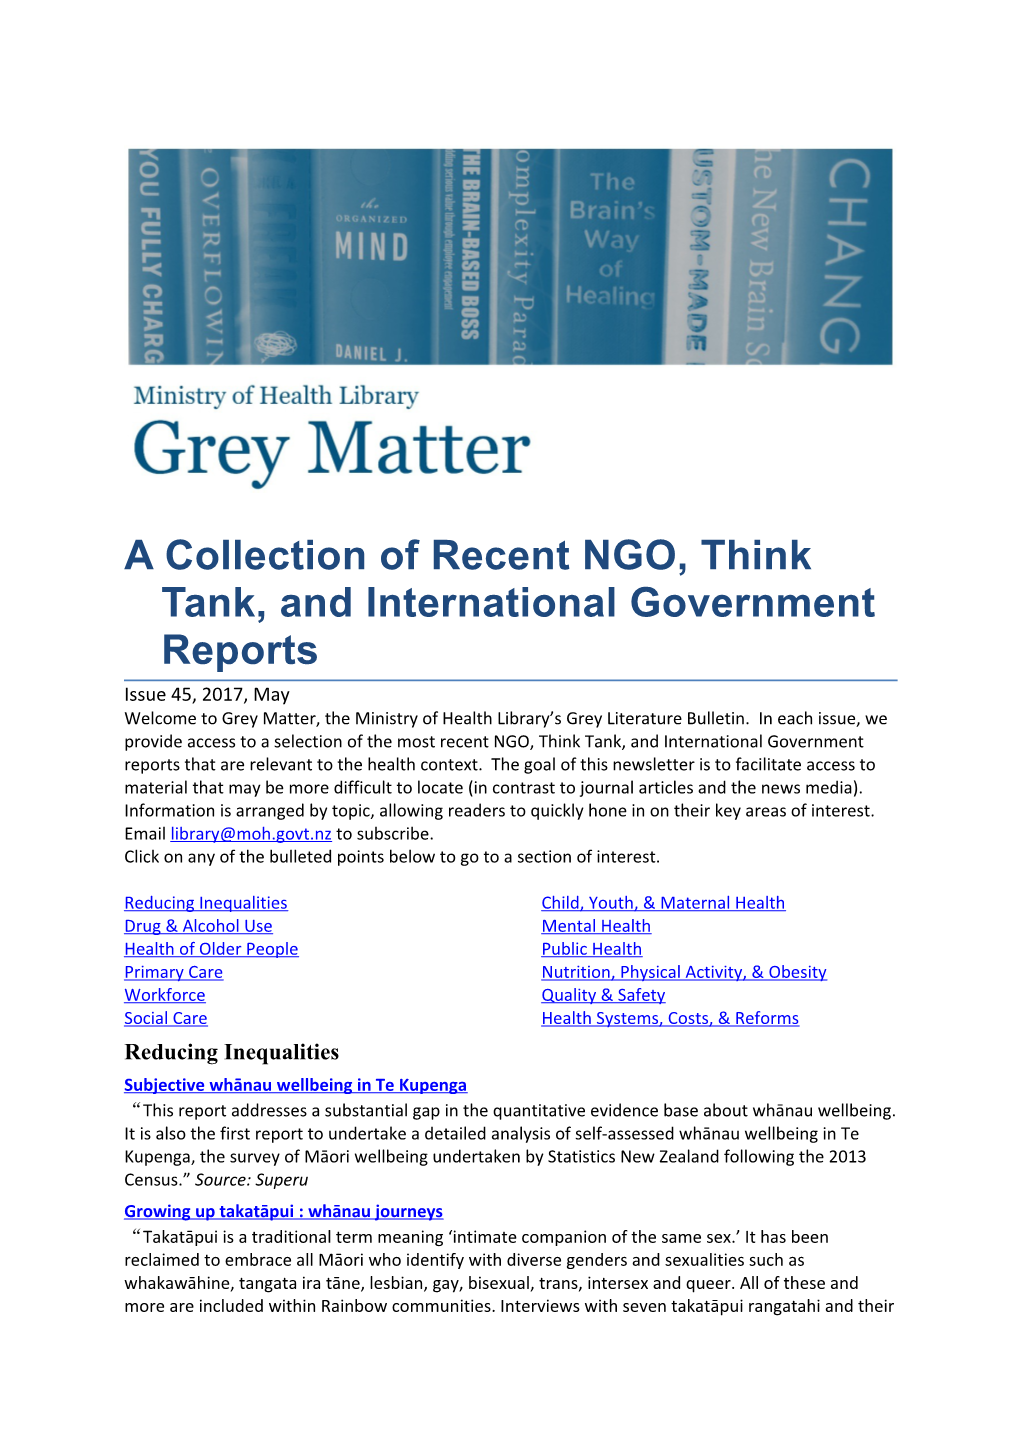 Grey Matter, Issue 45, May 2017